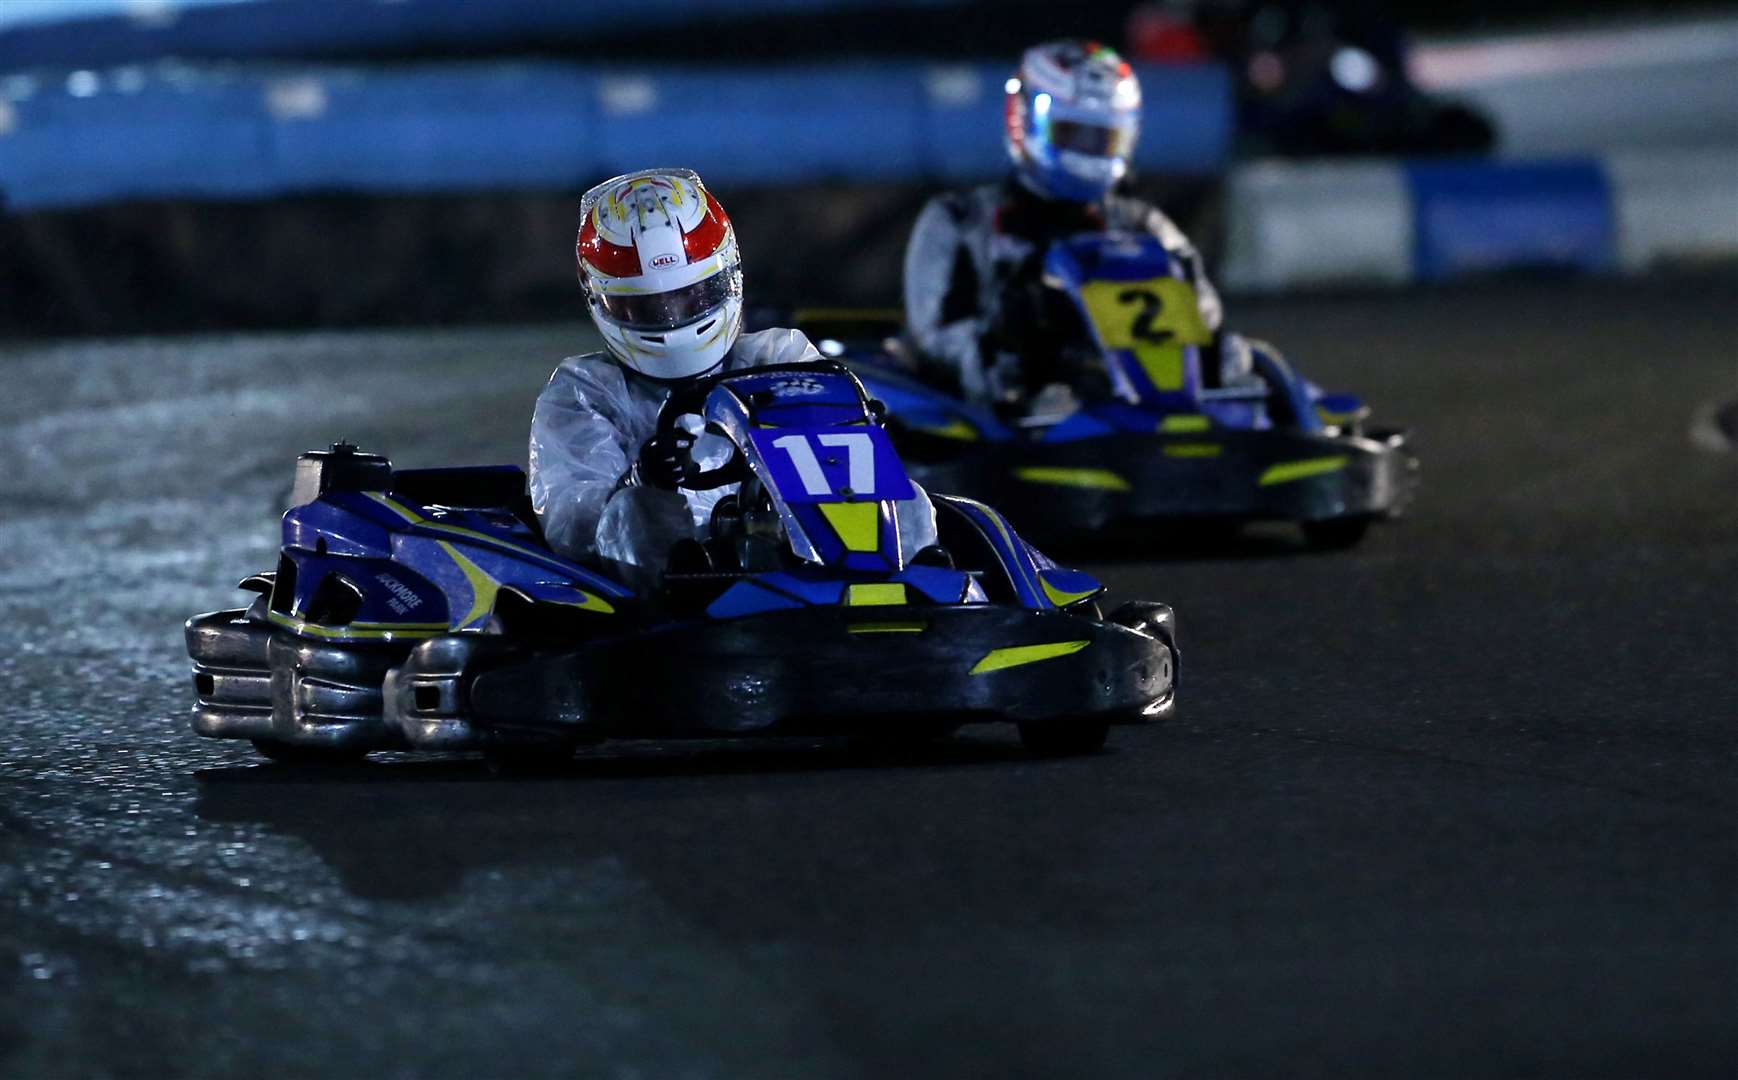 You can also book night-time racing sessions at Buckmore Park. Picture: Buckmore Park